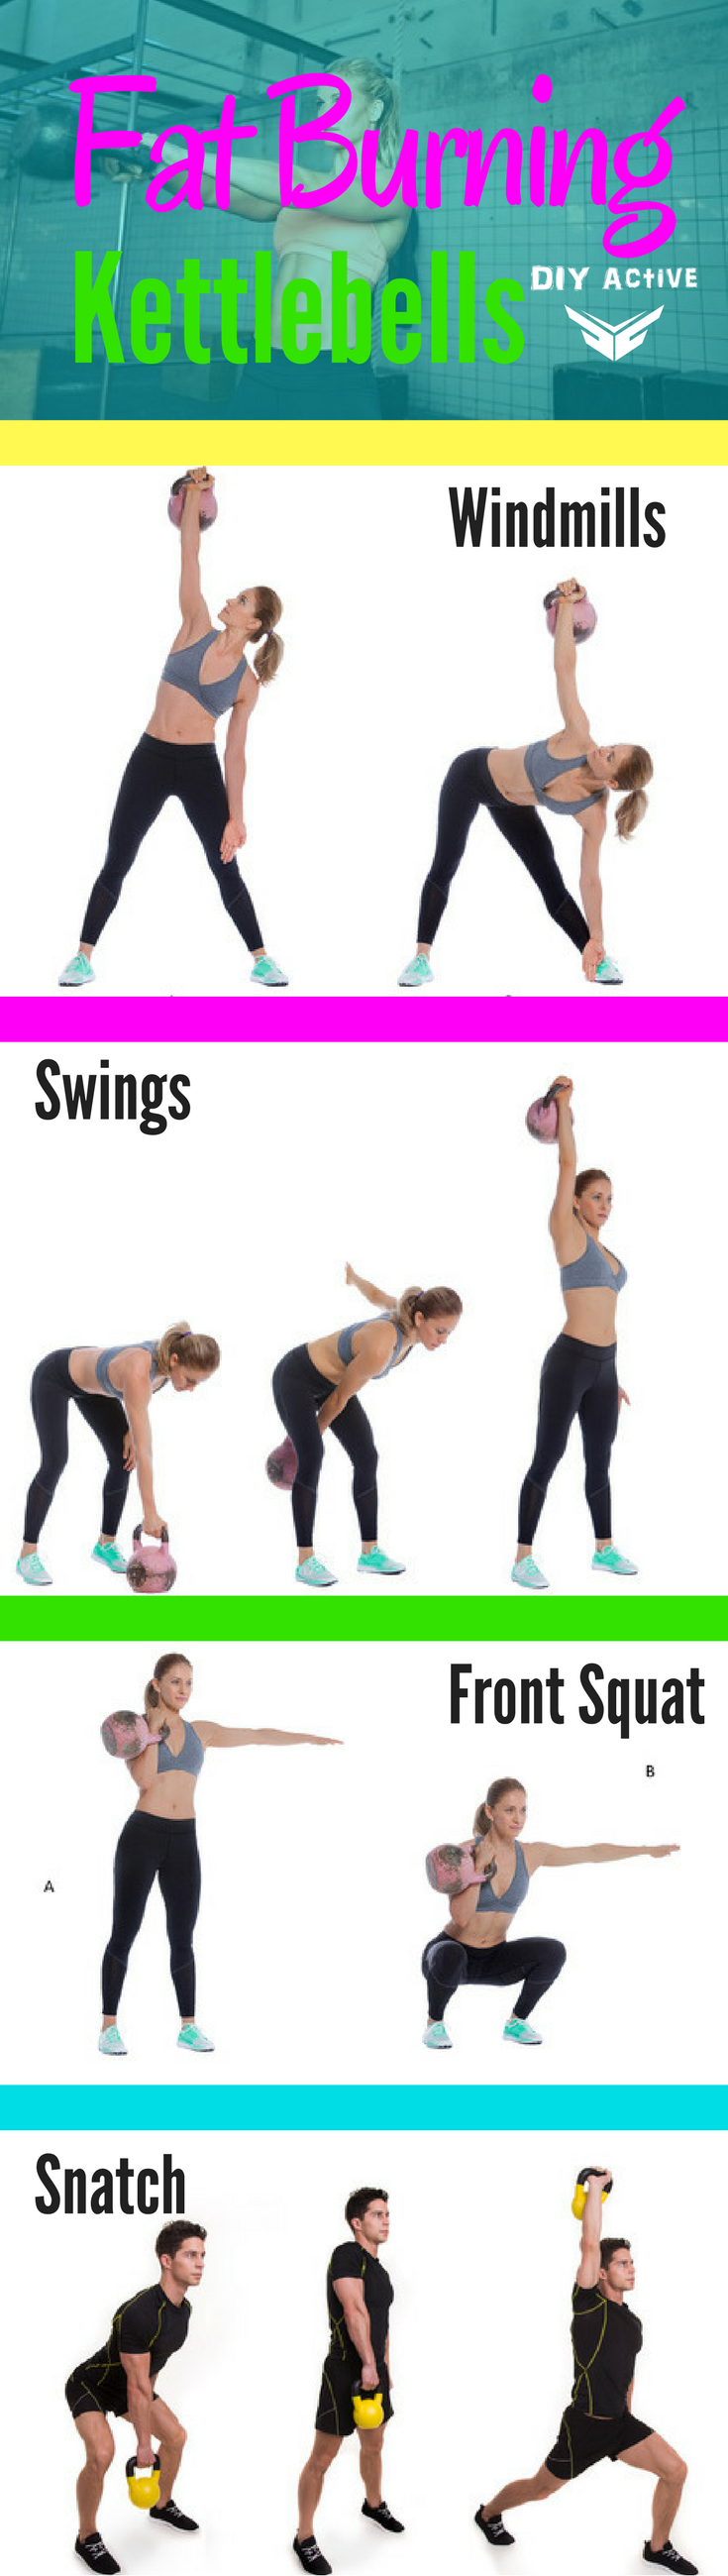 Improve Your Strength With These Kettlebell Exercises